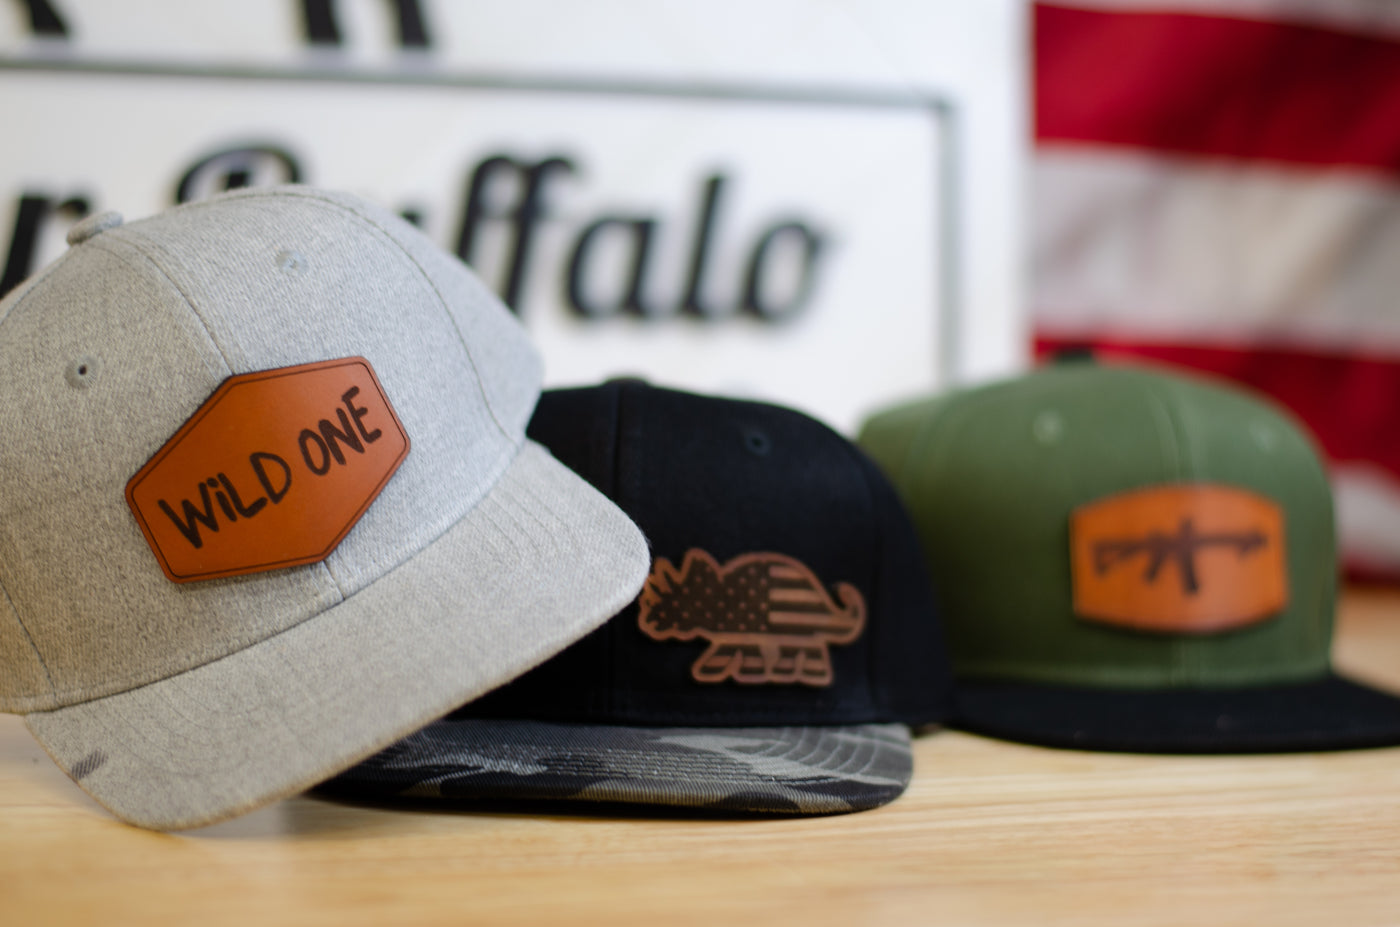 hats with custom patches